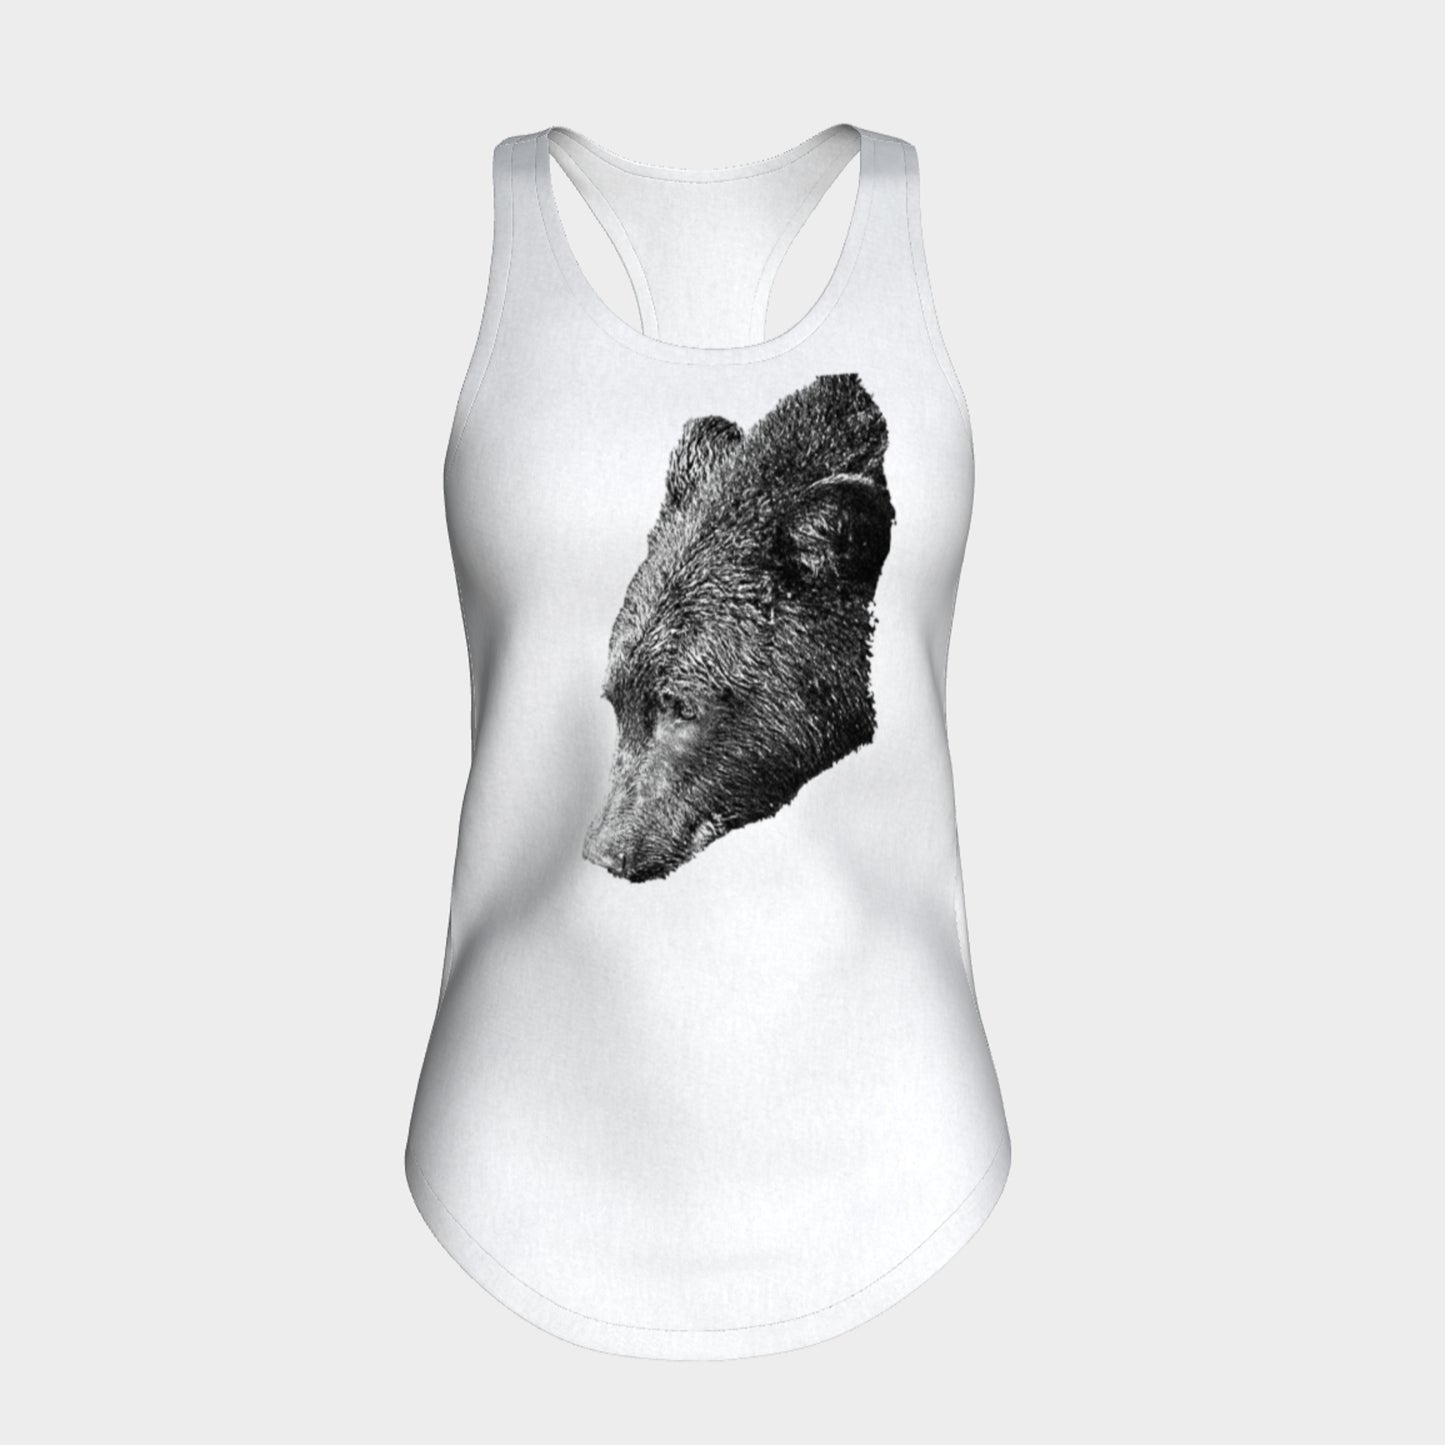 Adventure Bear Racerback Tank Top great for summer or working out available in summer colours by Van Isle Goddess